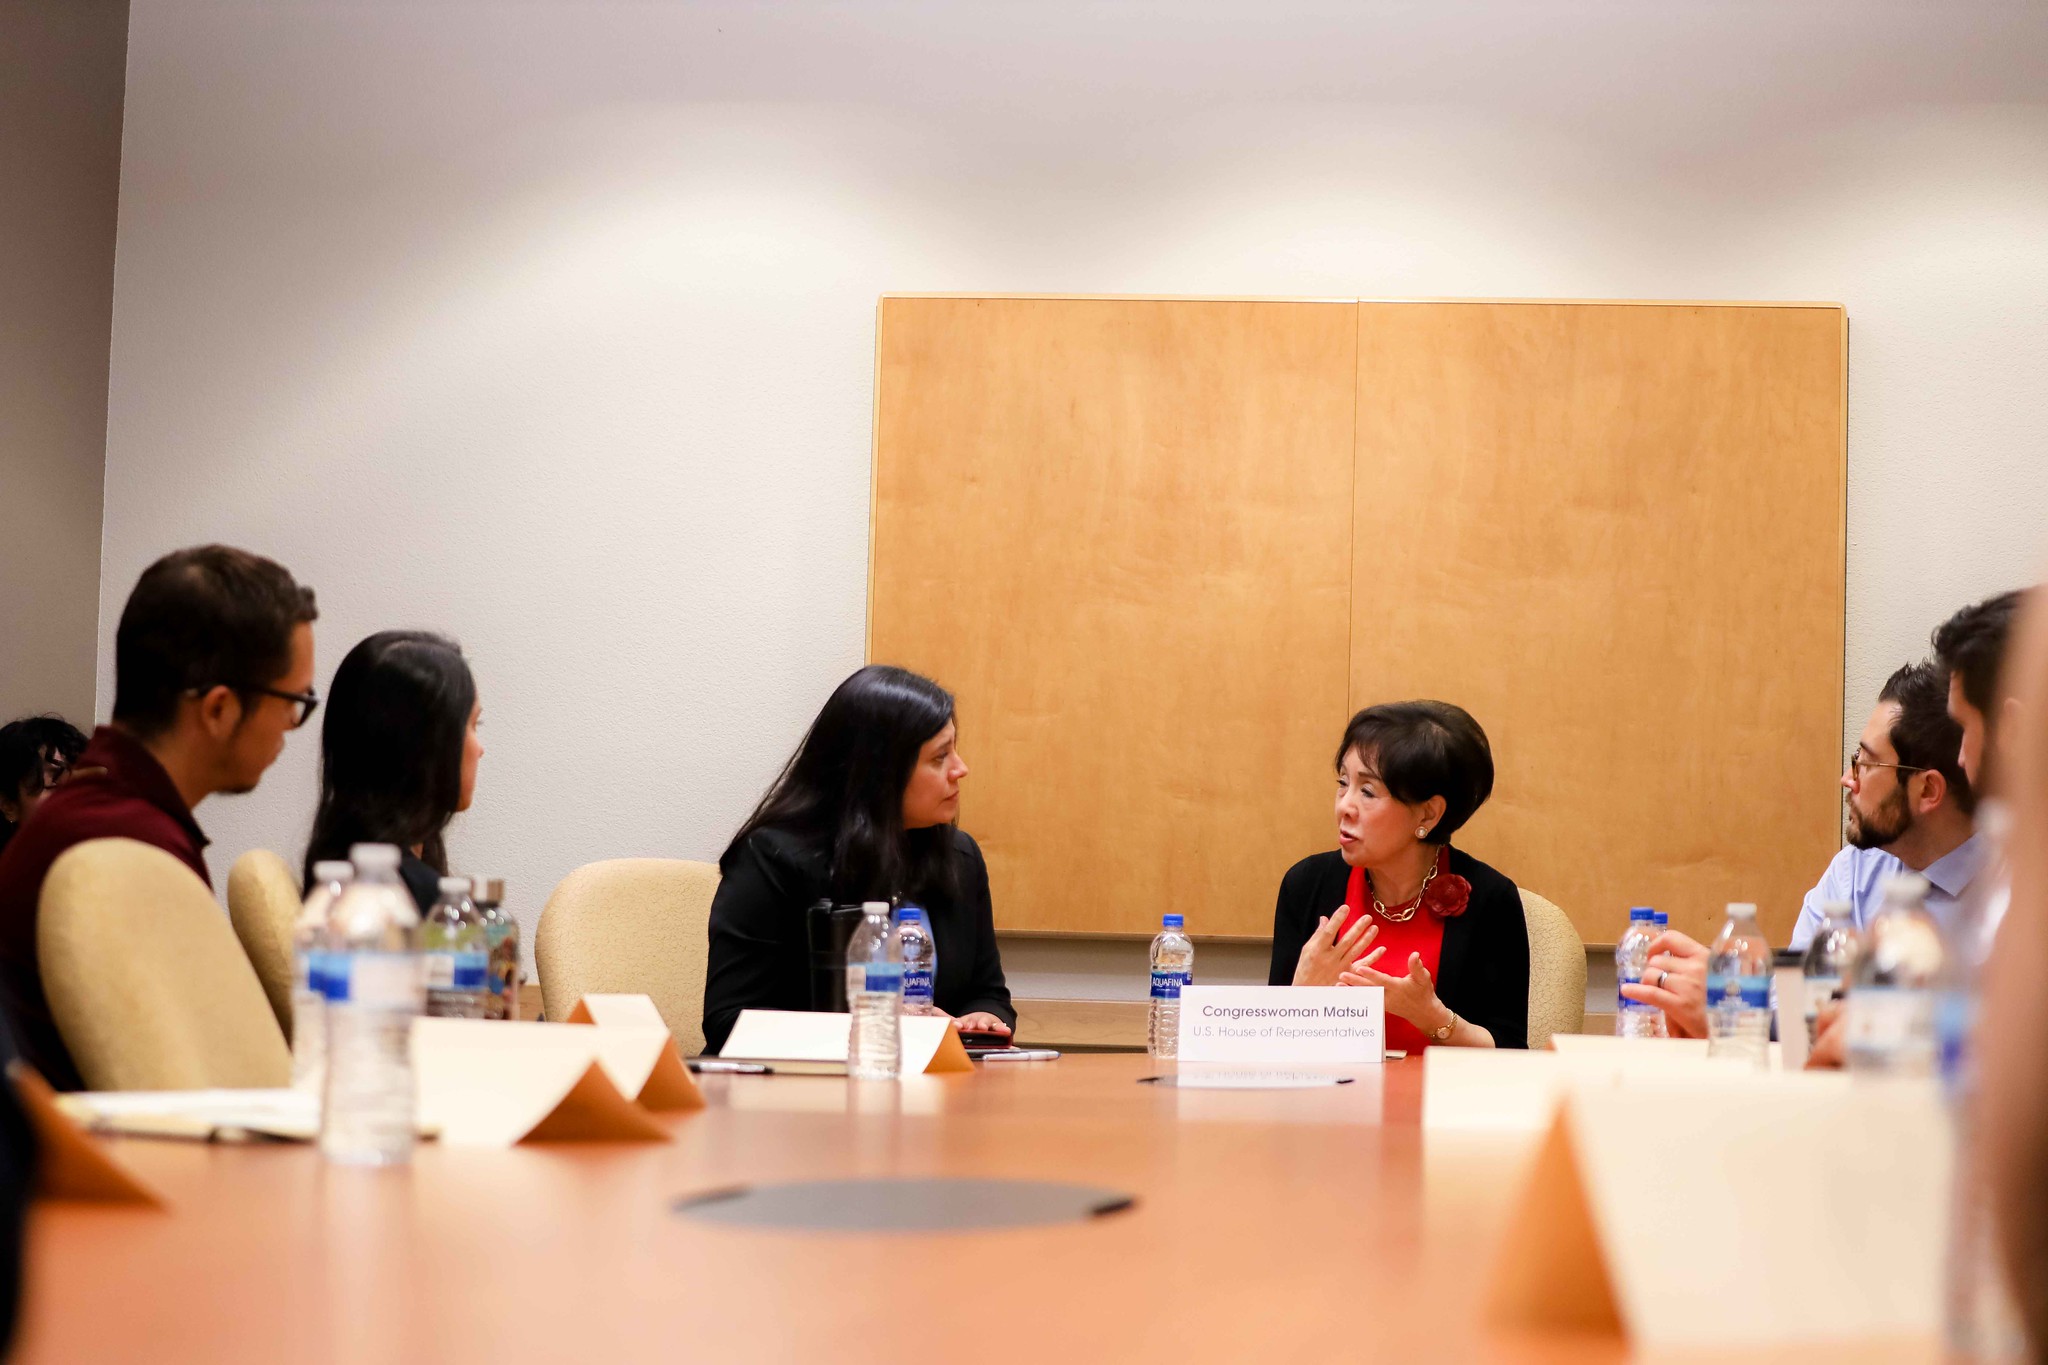 Congresswoman Doris Matsui, indoors sitting at a conference table, talking with other seated individuals